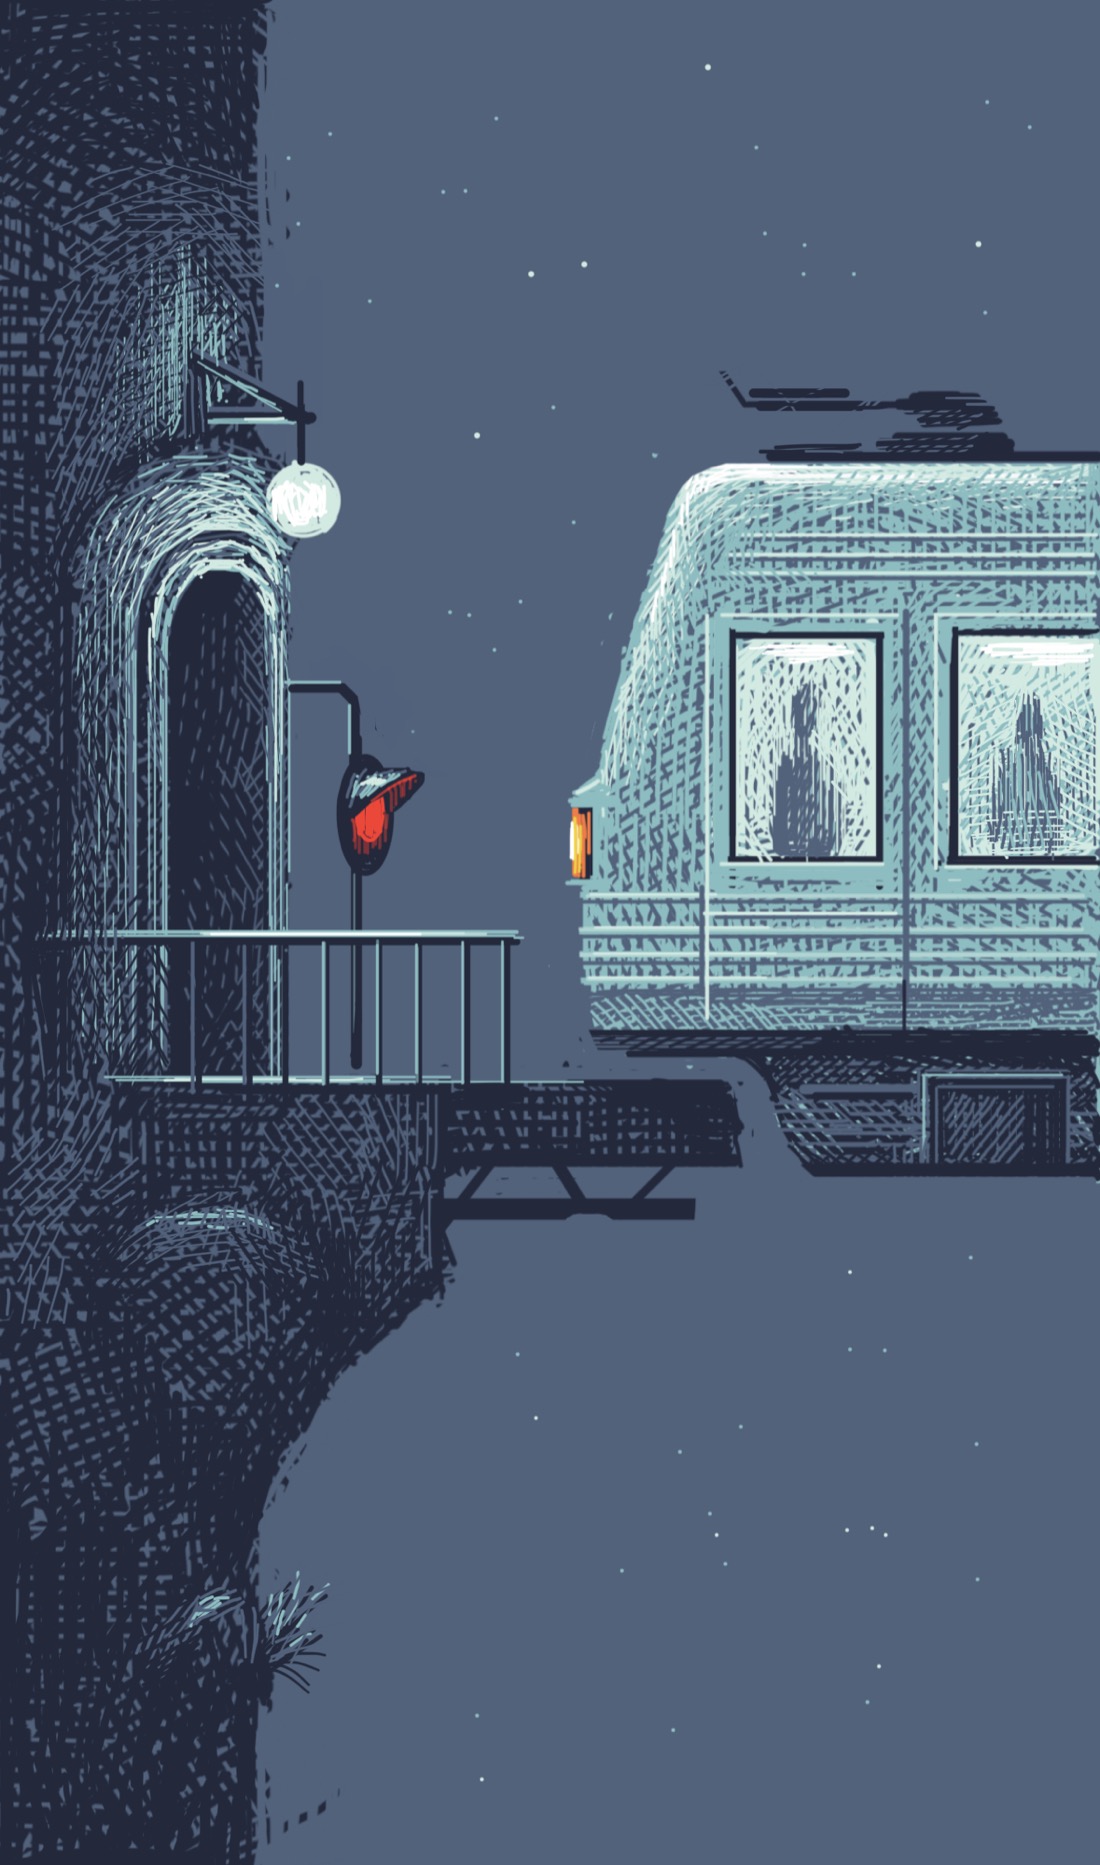 On the left of the drawing, a stark, perfectly vertical cliff wall, interrupted only by a doorway set in the wall, a small deck with a railing jutting out from it. It's night; stars on a slate gray sky. Above the doorway is a glowing spherical lamp, similar to a streetlamp. Next to the doorway is a red train signal. Pulled up to the deck is what looks like a subway car, except it is floating in space and doesn't have wheels.